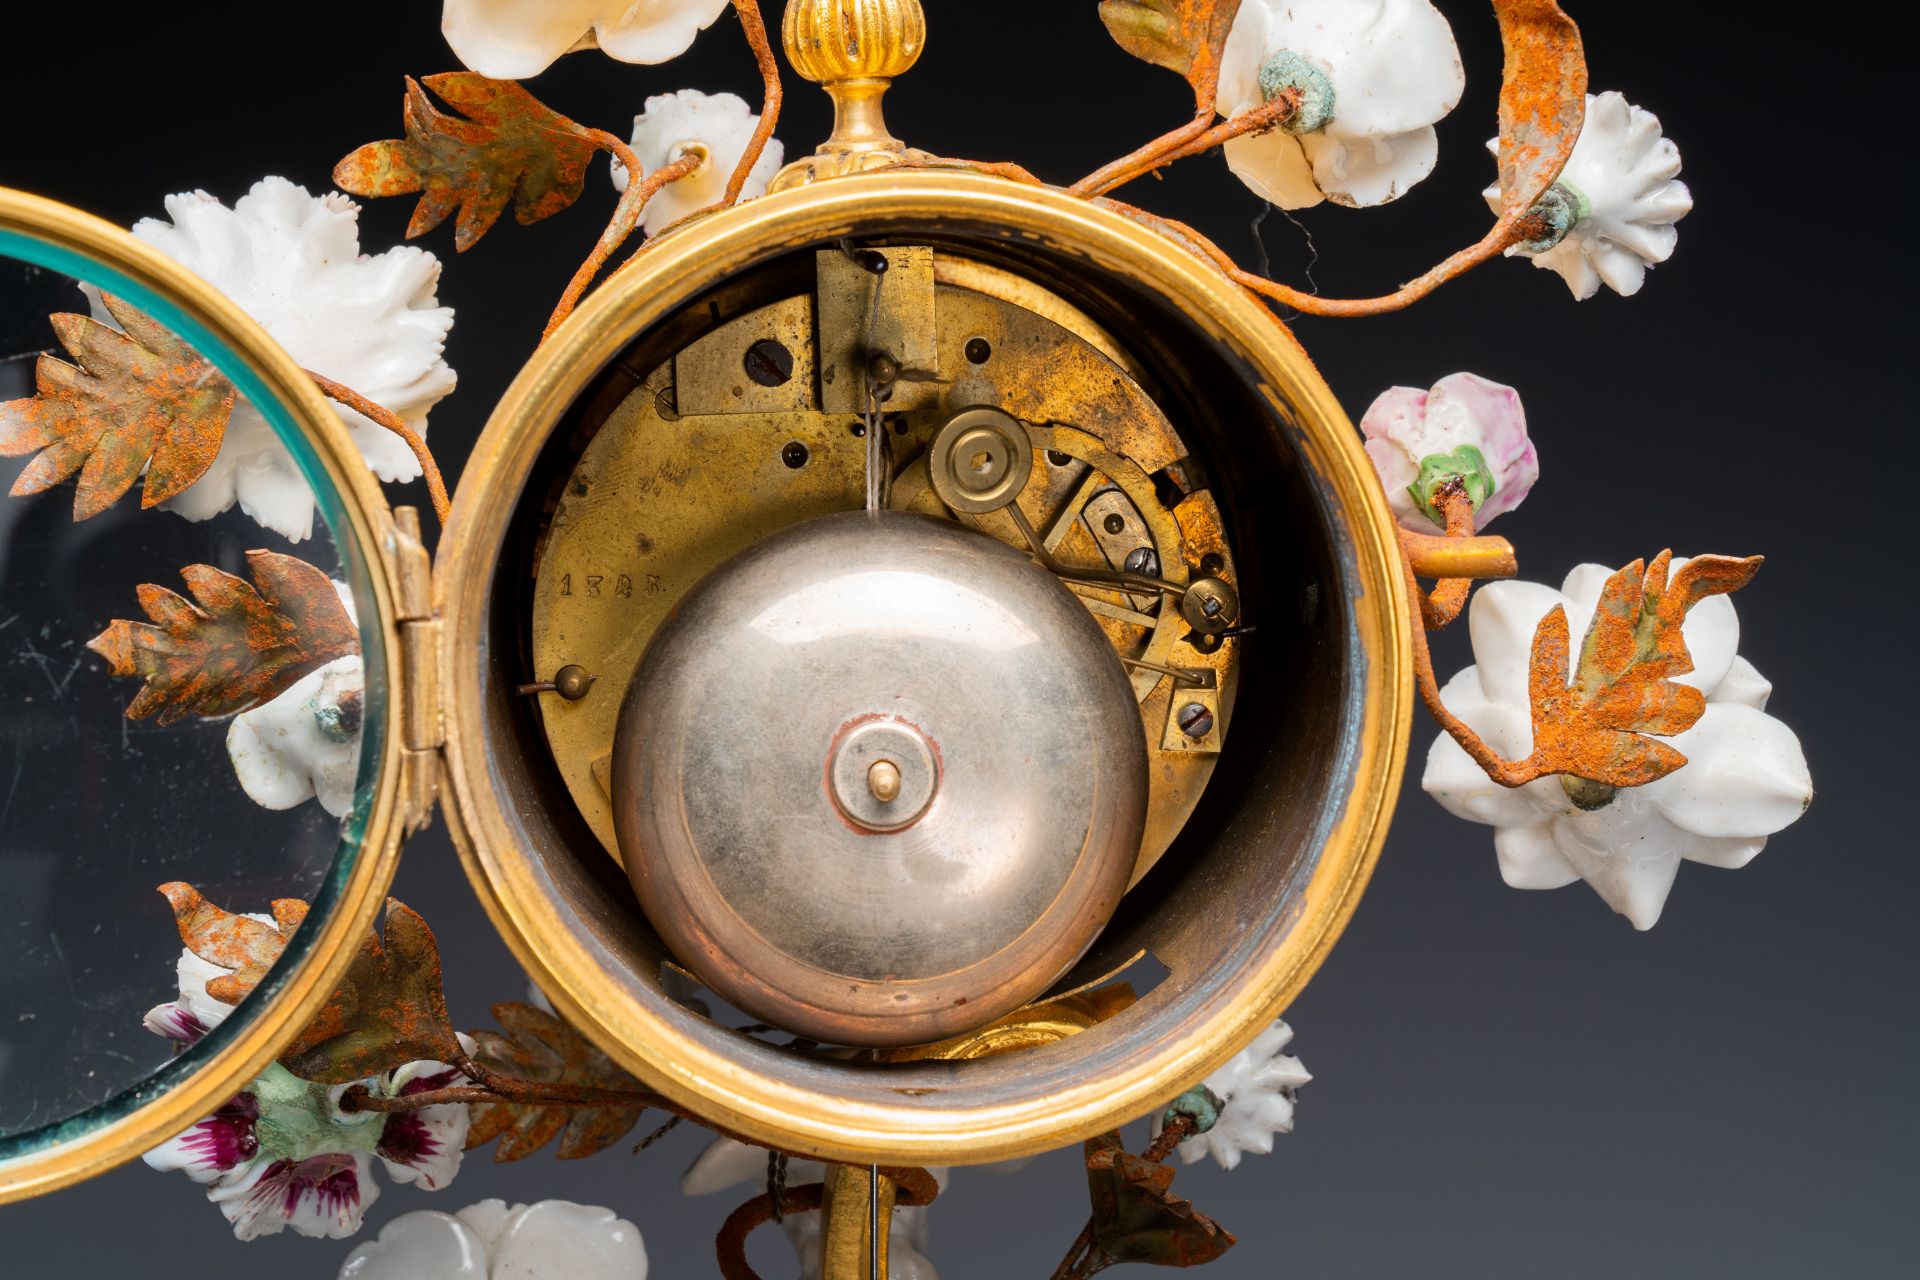 A French ormolu-mounted porcelain mantel clock, 18/19th C. - Image 16 of 28